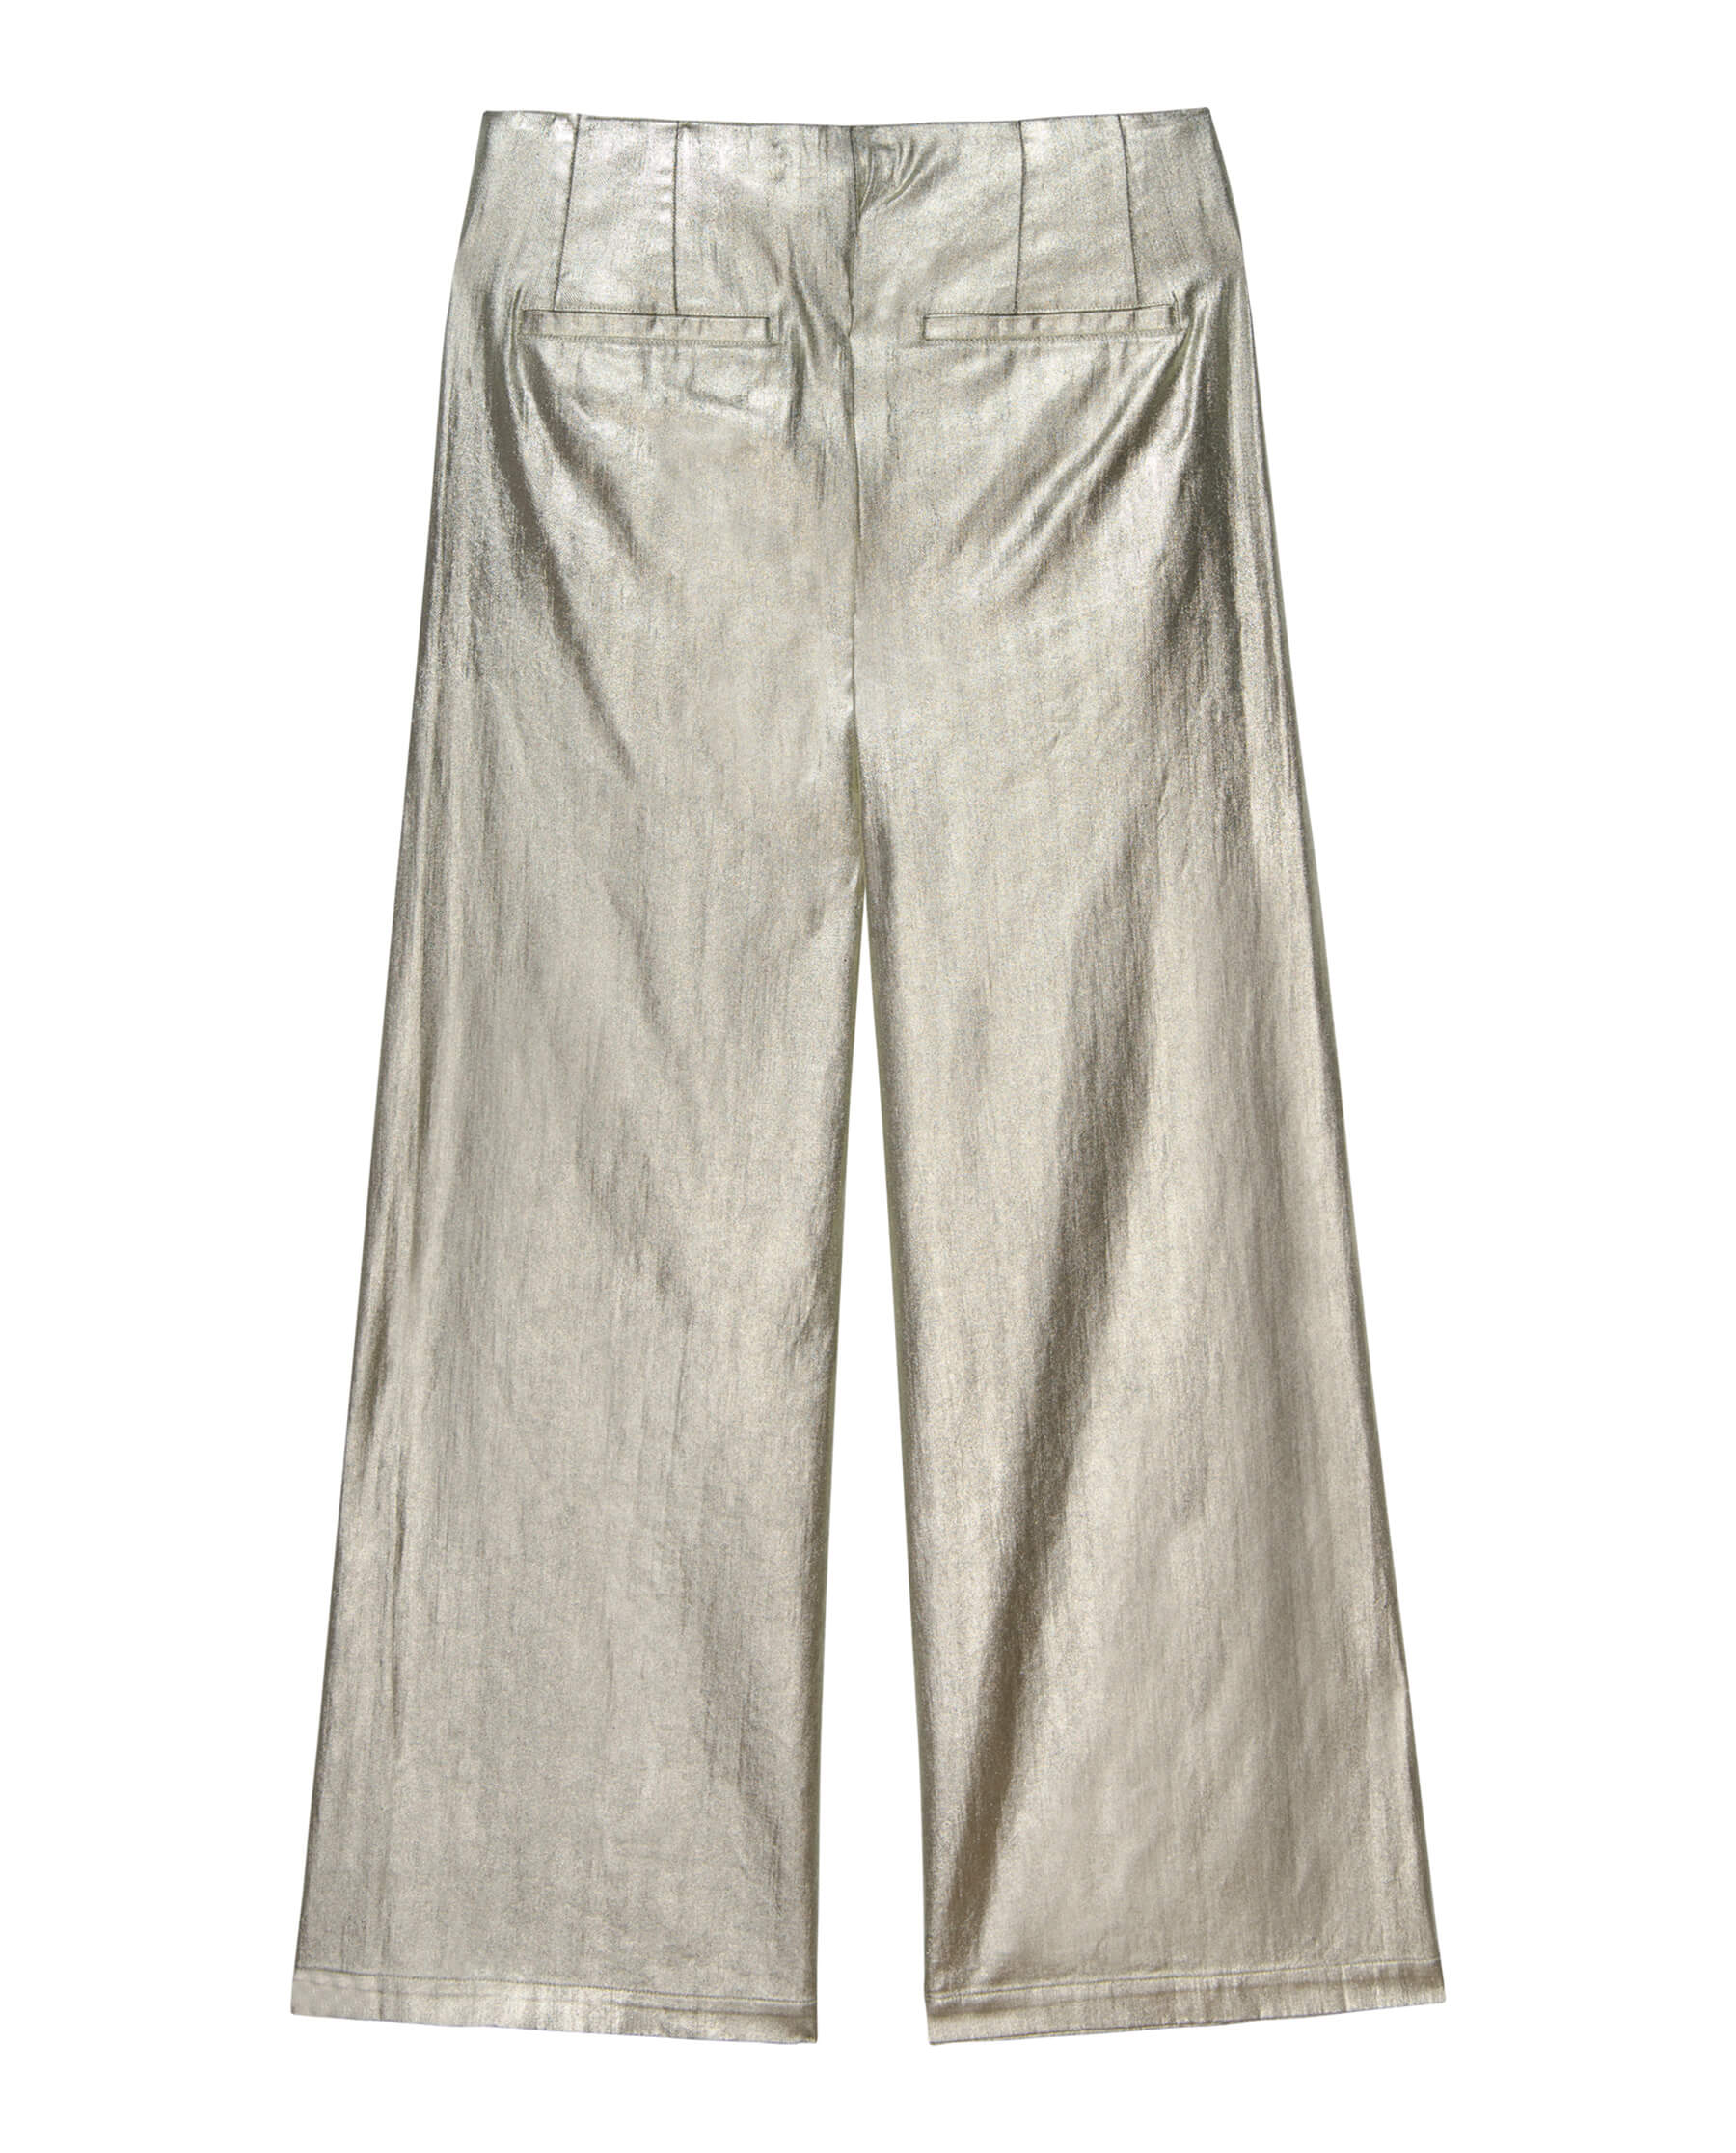 The Great Sculpted Trousers in Starlight